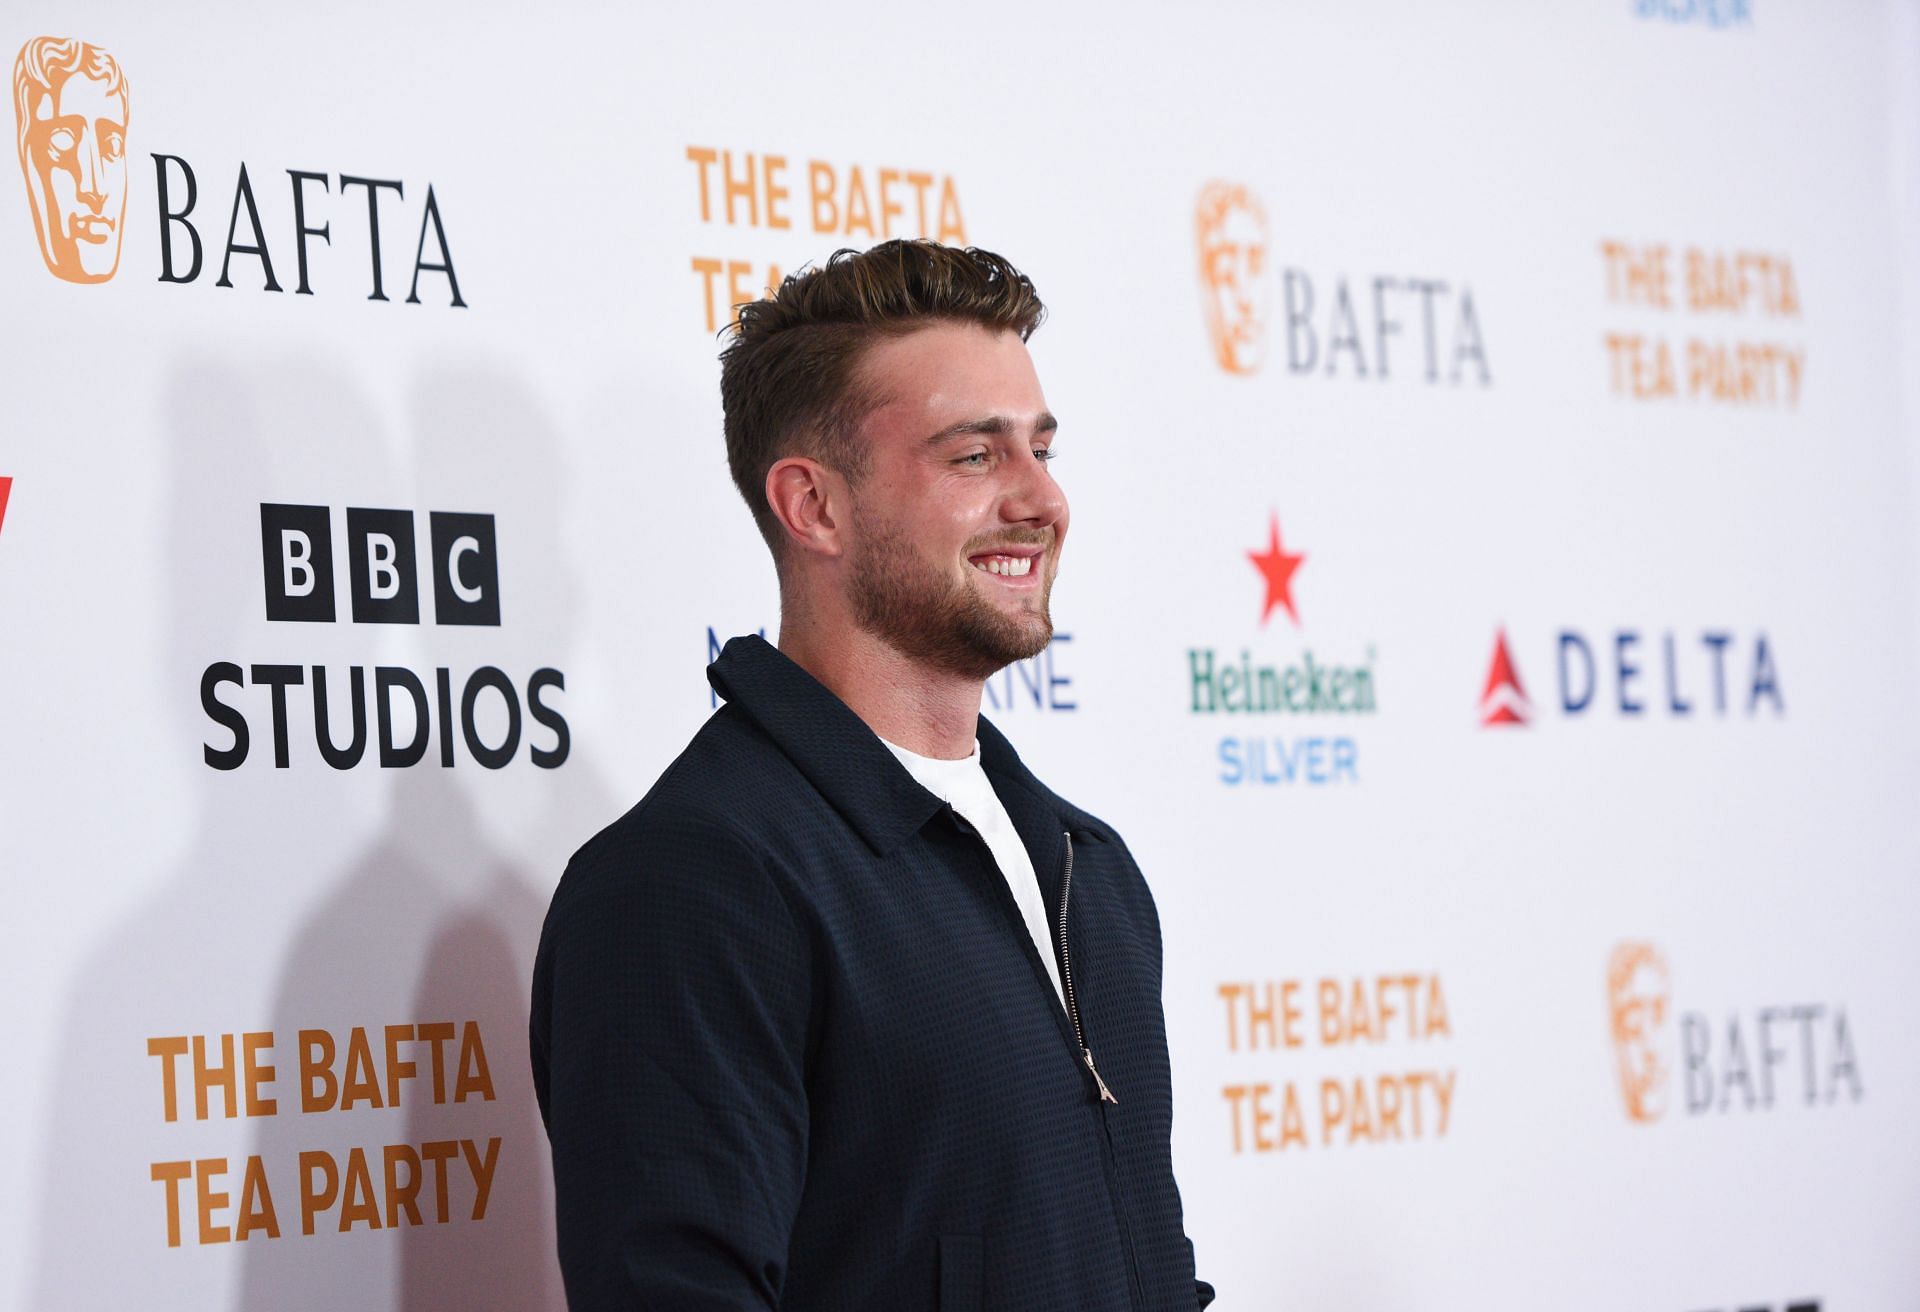 Harry Jowsey at the BAFTA Tea Party Presented by Delta Air Lines, Virgin Atlantic and BBC Studios Los Angeles Productions (Image via Getty Images)